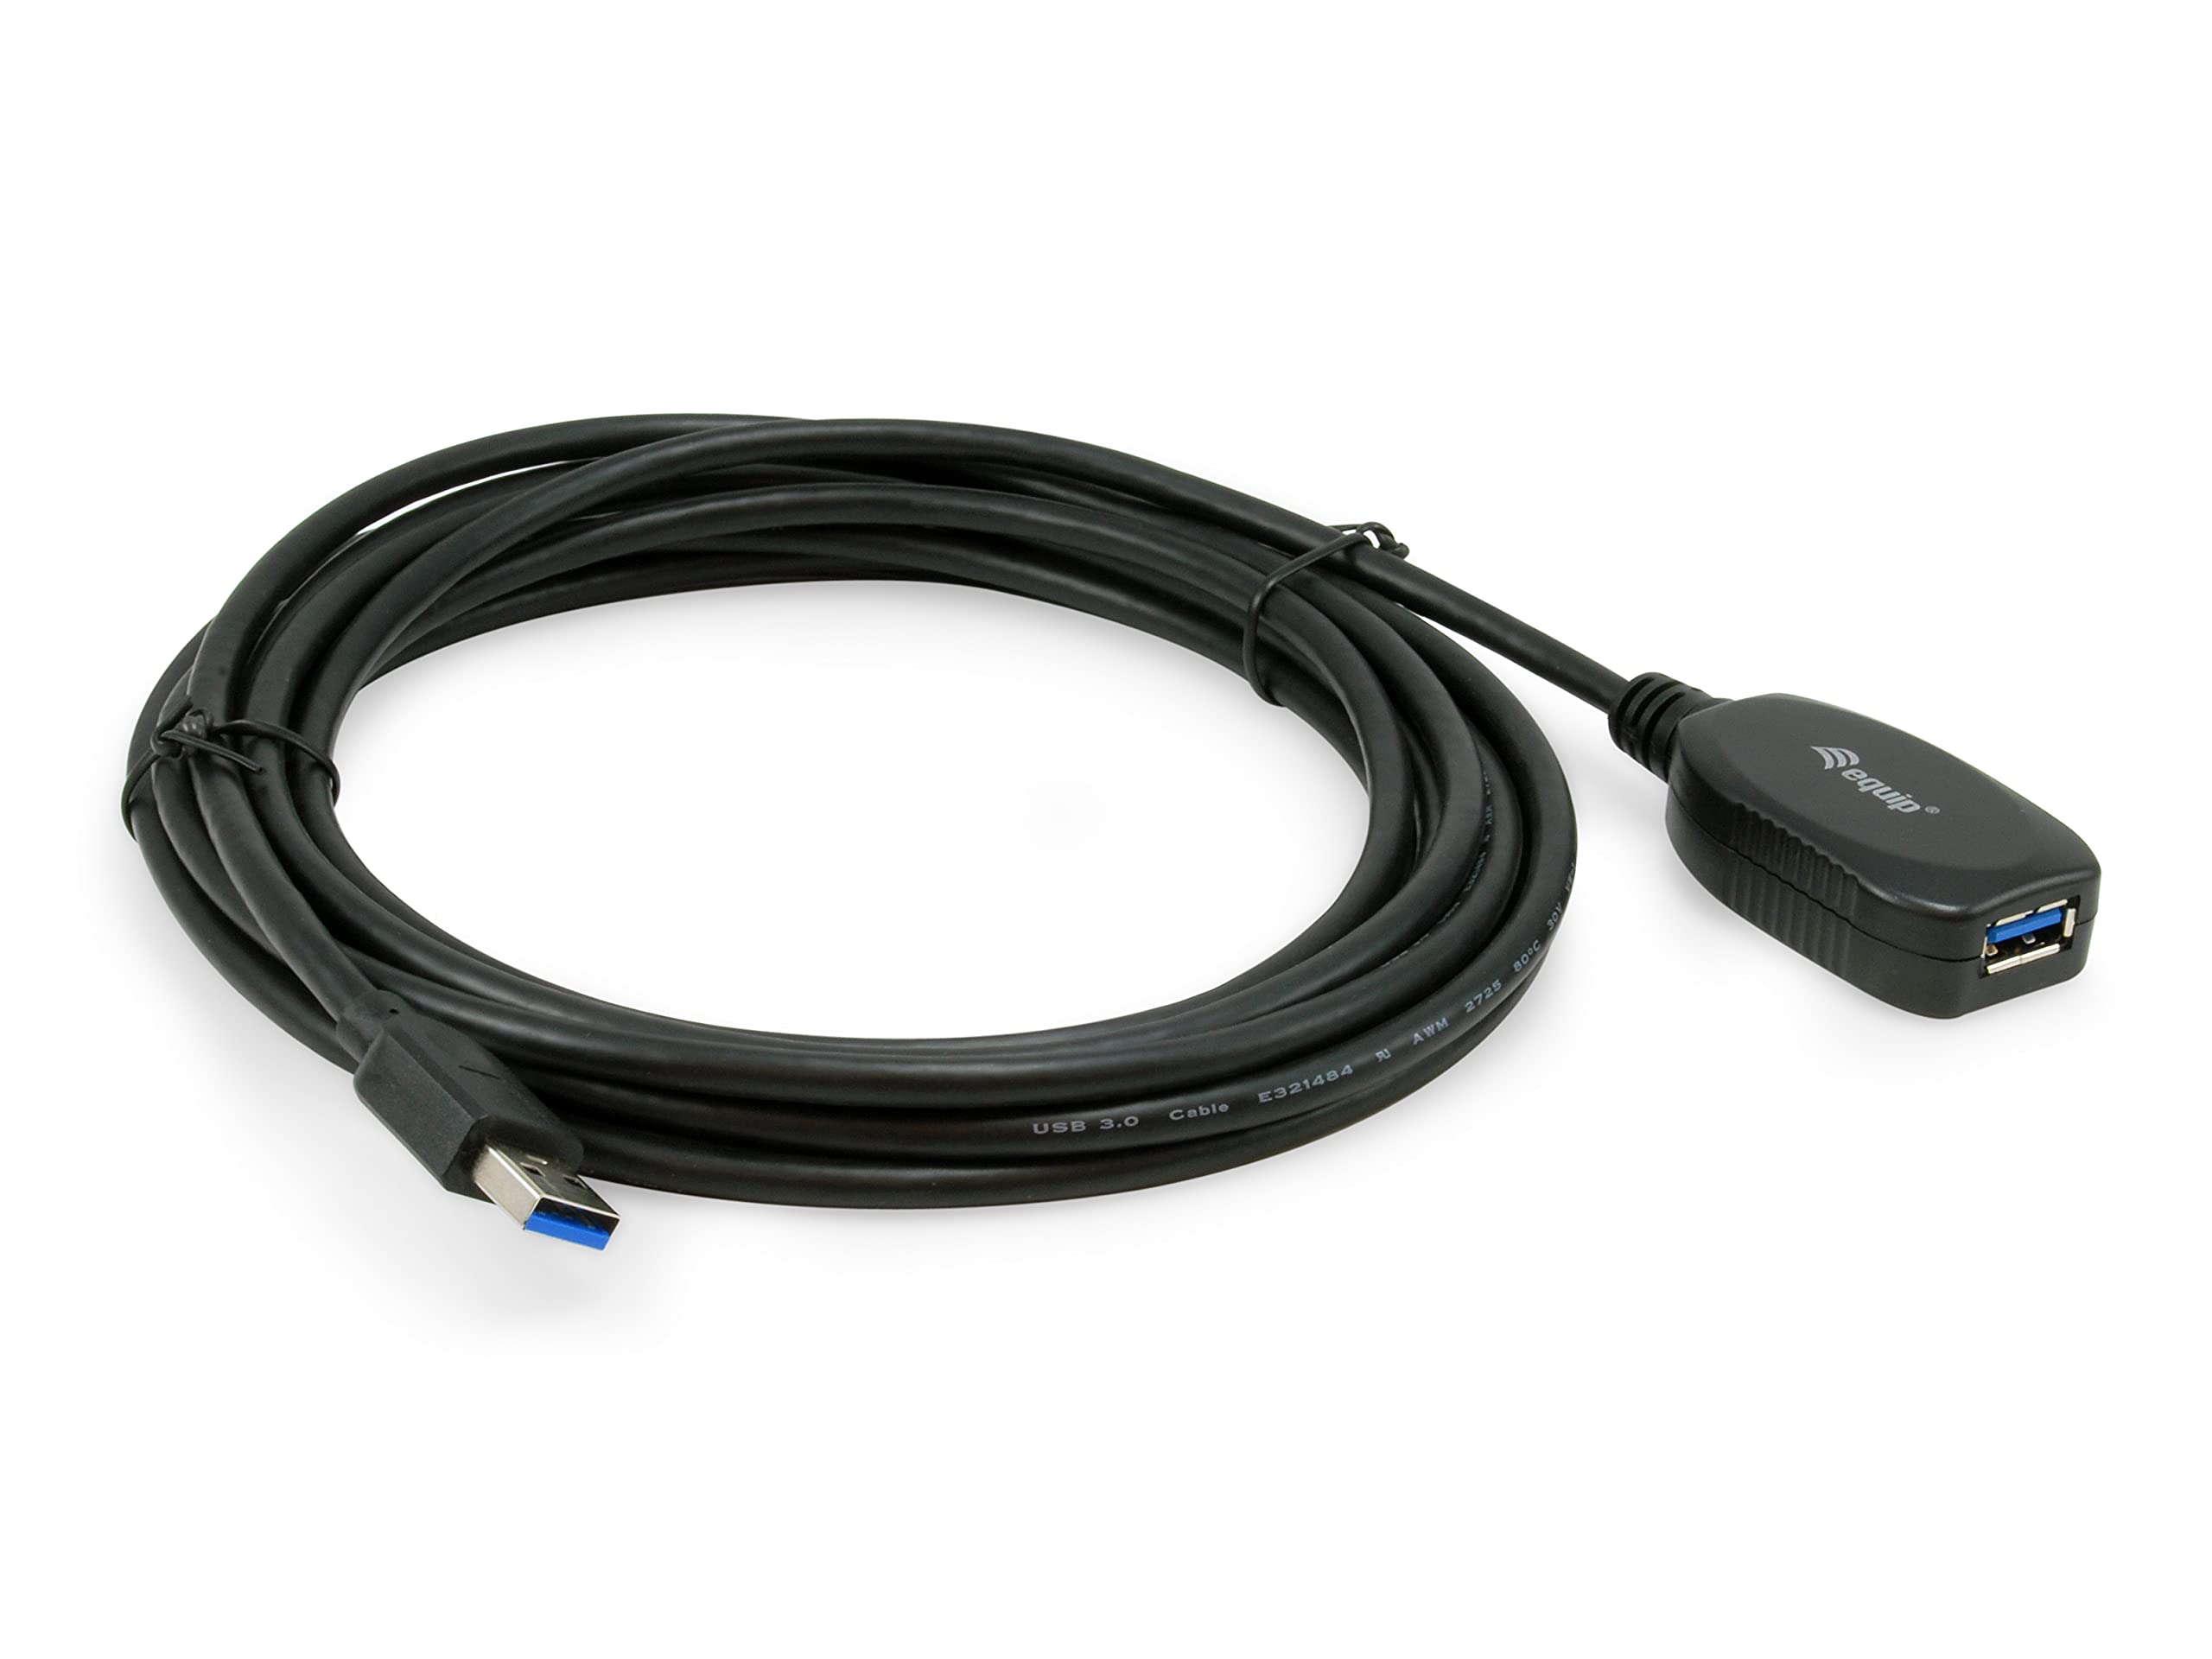 USB 3.0 ACTIVE EXTENSION CABLE 5.0M